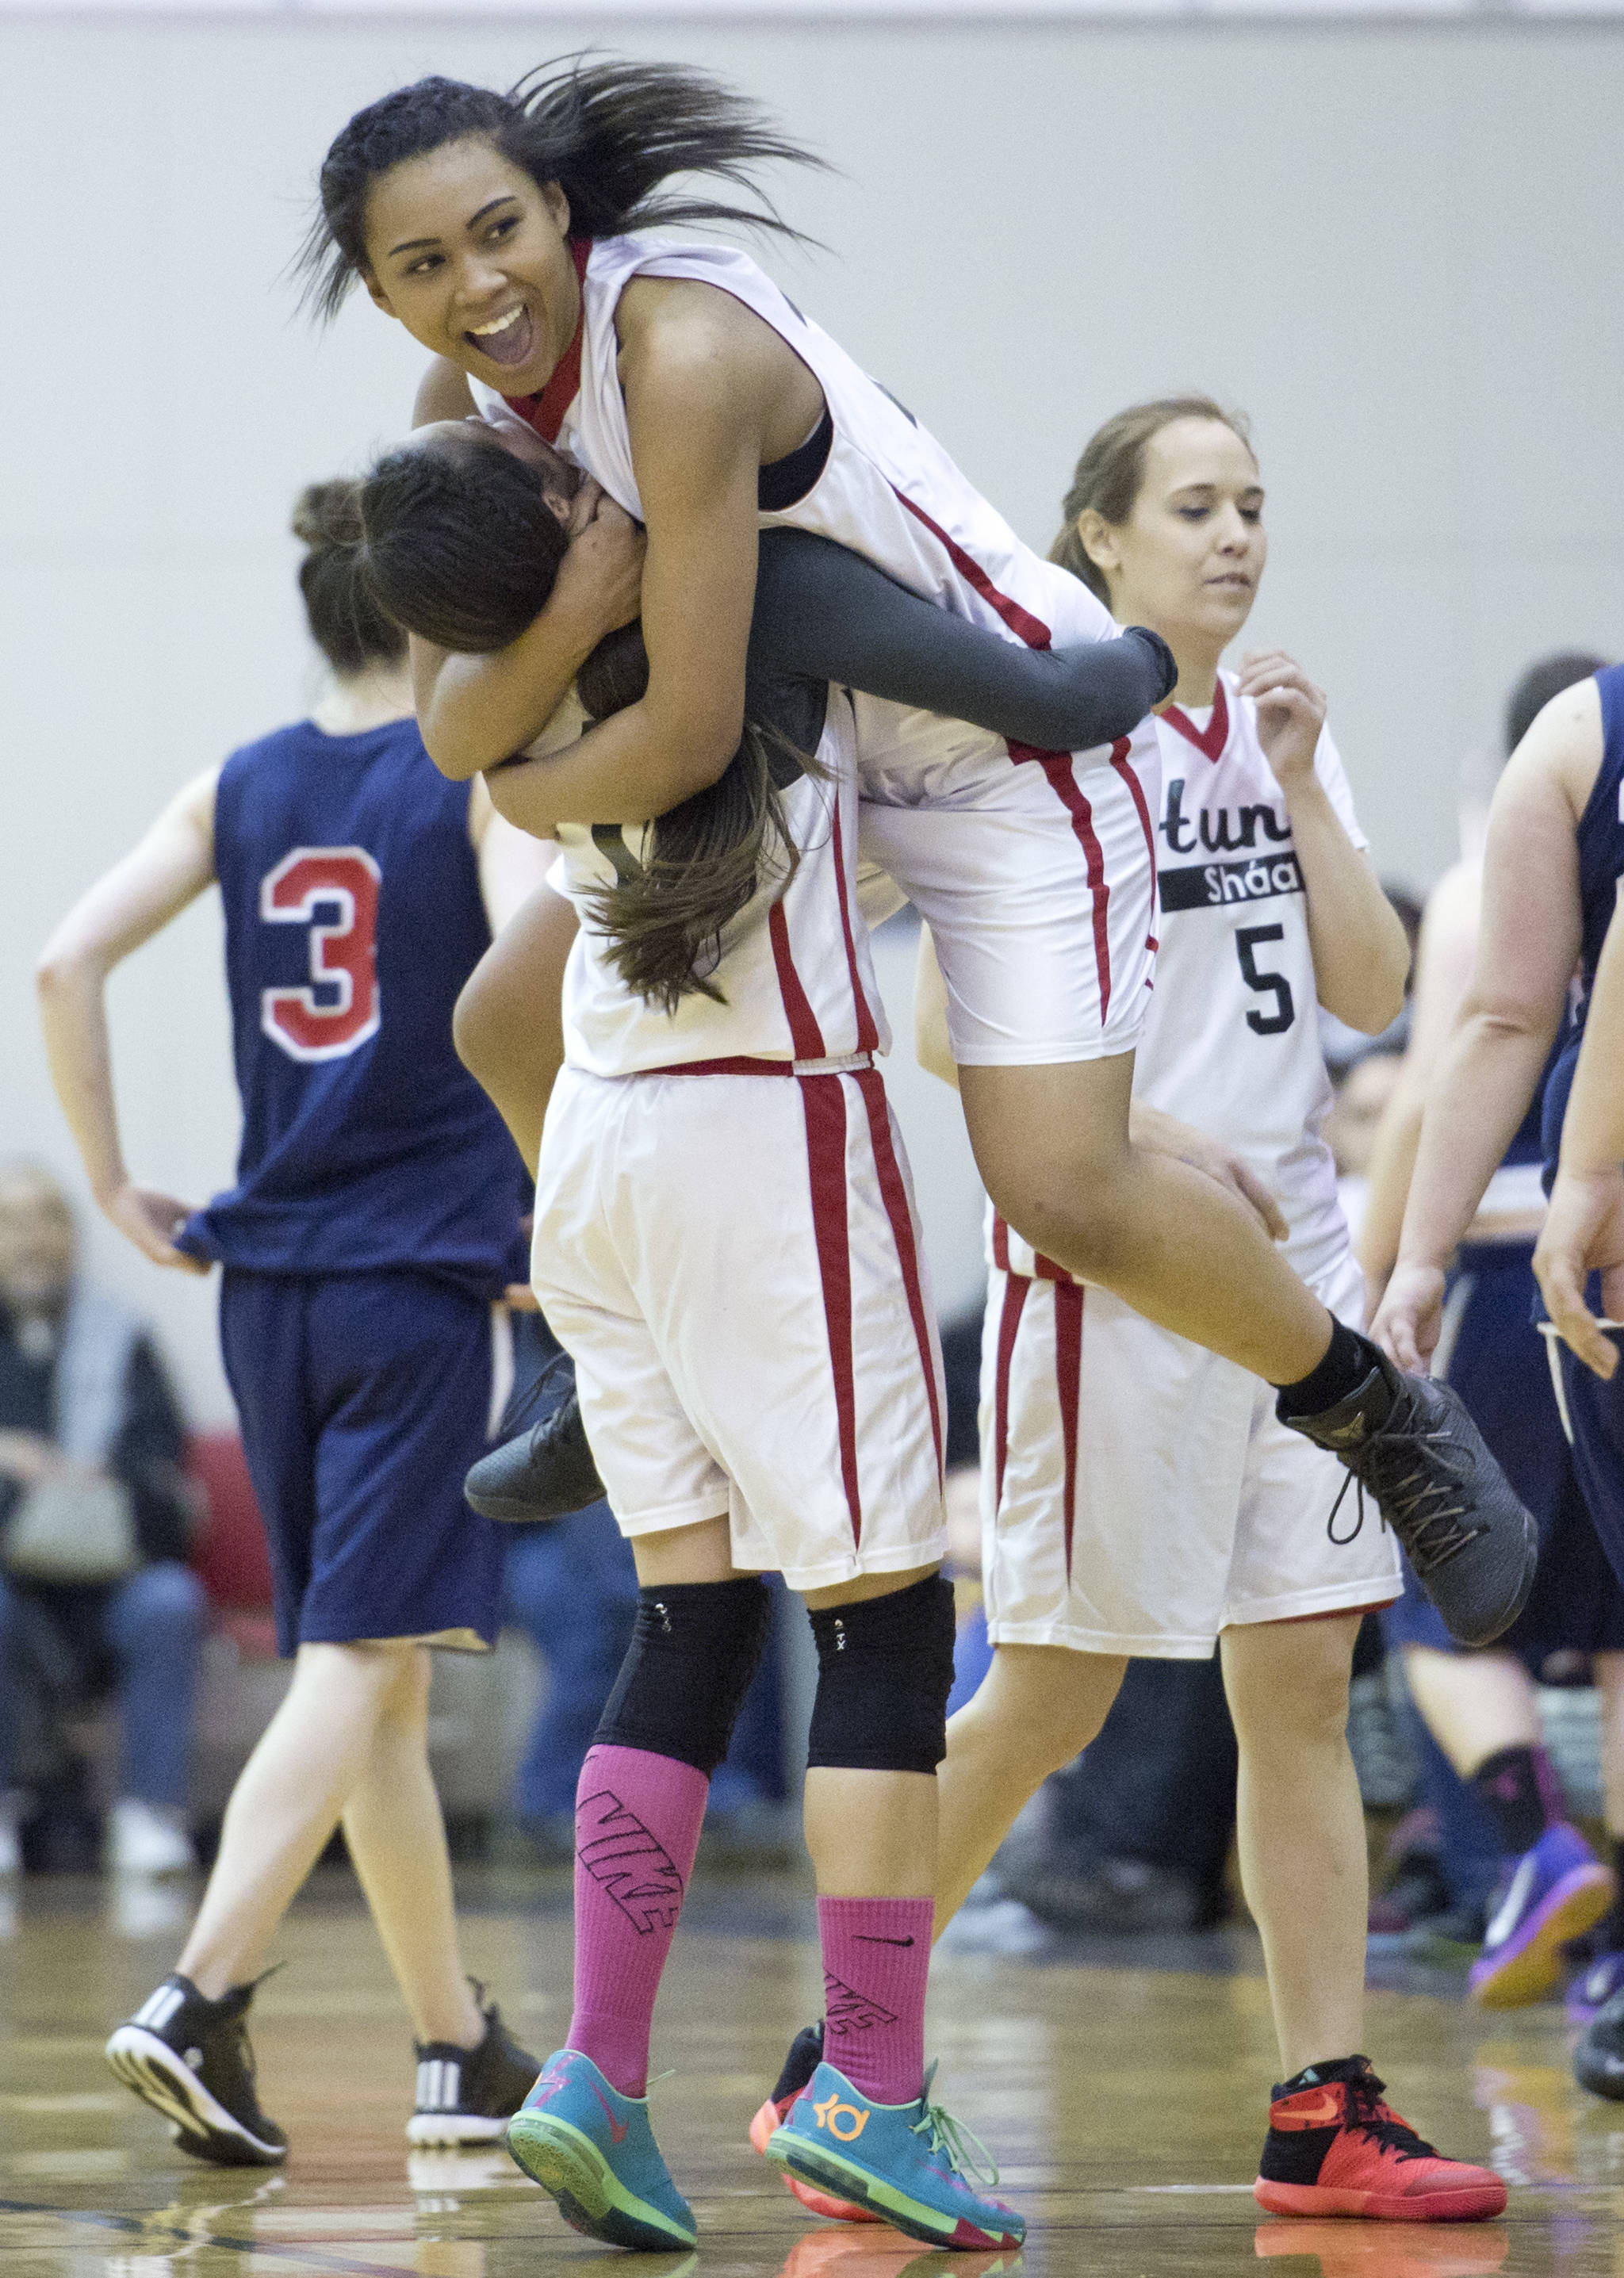 Hoonah’s Melissa Fisher lifts teammate Taryn White in celebration of their win over Yakutat in their Womens Bracket game in the Lions Club’s Gold Medal Basketball Tournament at Juneau-Douglas High School on Friday, March 24, 2017. Hoonah won 56-53. (Michael Penn | Juneau Empire)